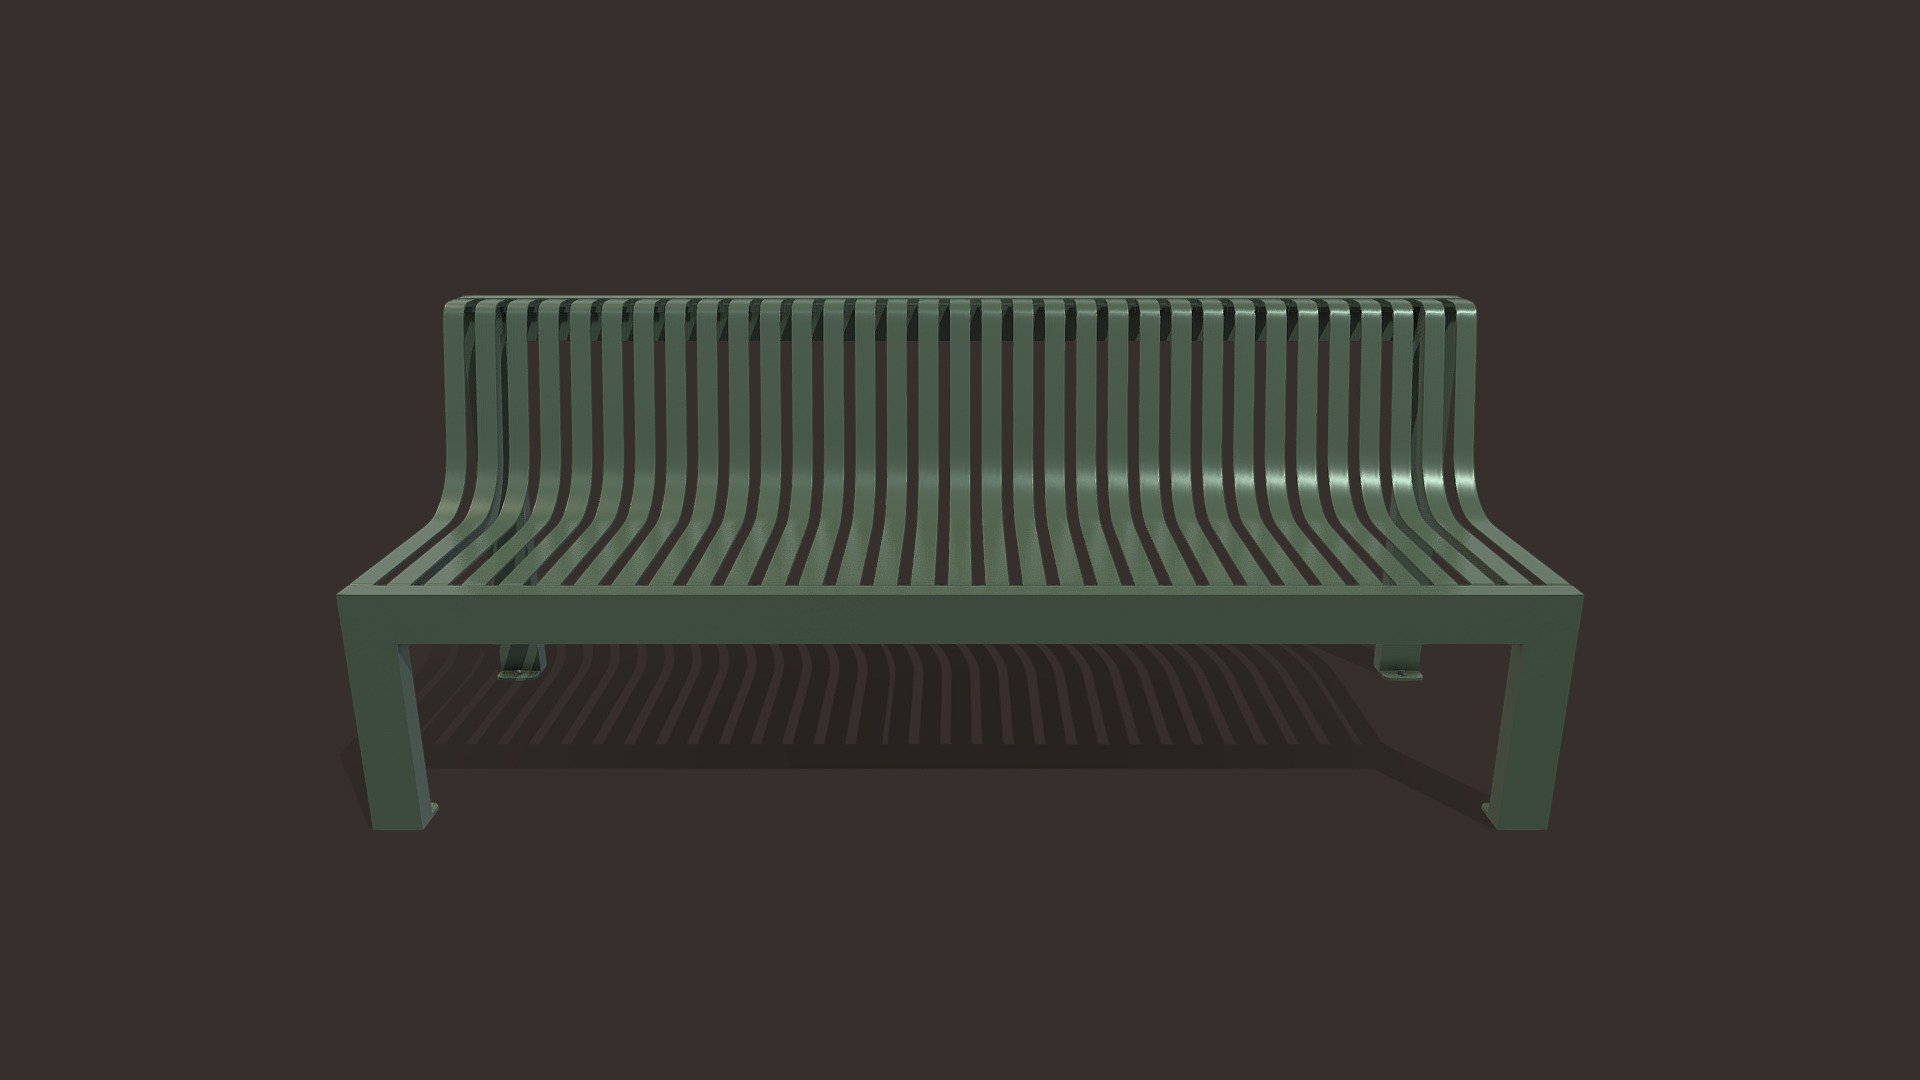 Metallic Bench is a model that will enhance detail and realism to any of your rendering projects. The model has a fully textured, detailed design that allows for close-up renders, and was originally modeled in Blender 3.5, Textured in Substance Painter 2023 and rendered with Adobe Stagier Renders have no post-processing.

Features: -High-quality polygonal model, correctly scaled for an accurate representation of the original object. -The model’s resolutions are optimized for polygon efficiency. -The model is fully textured with all materials applied. -All textures and materials are included and mapped in every format. -No cleaning up necessary just drop your models into the scene and start rendering. -No special plugin needed to open scene.

Measurements: Units: M

File Formats: OBJ FBX

Textures Formats: PNG 4k - Metallic Bench - Buy Royalty Free 3D model by MDgraphicLAB 3d model